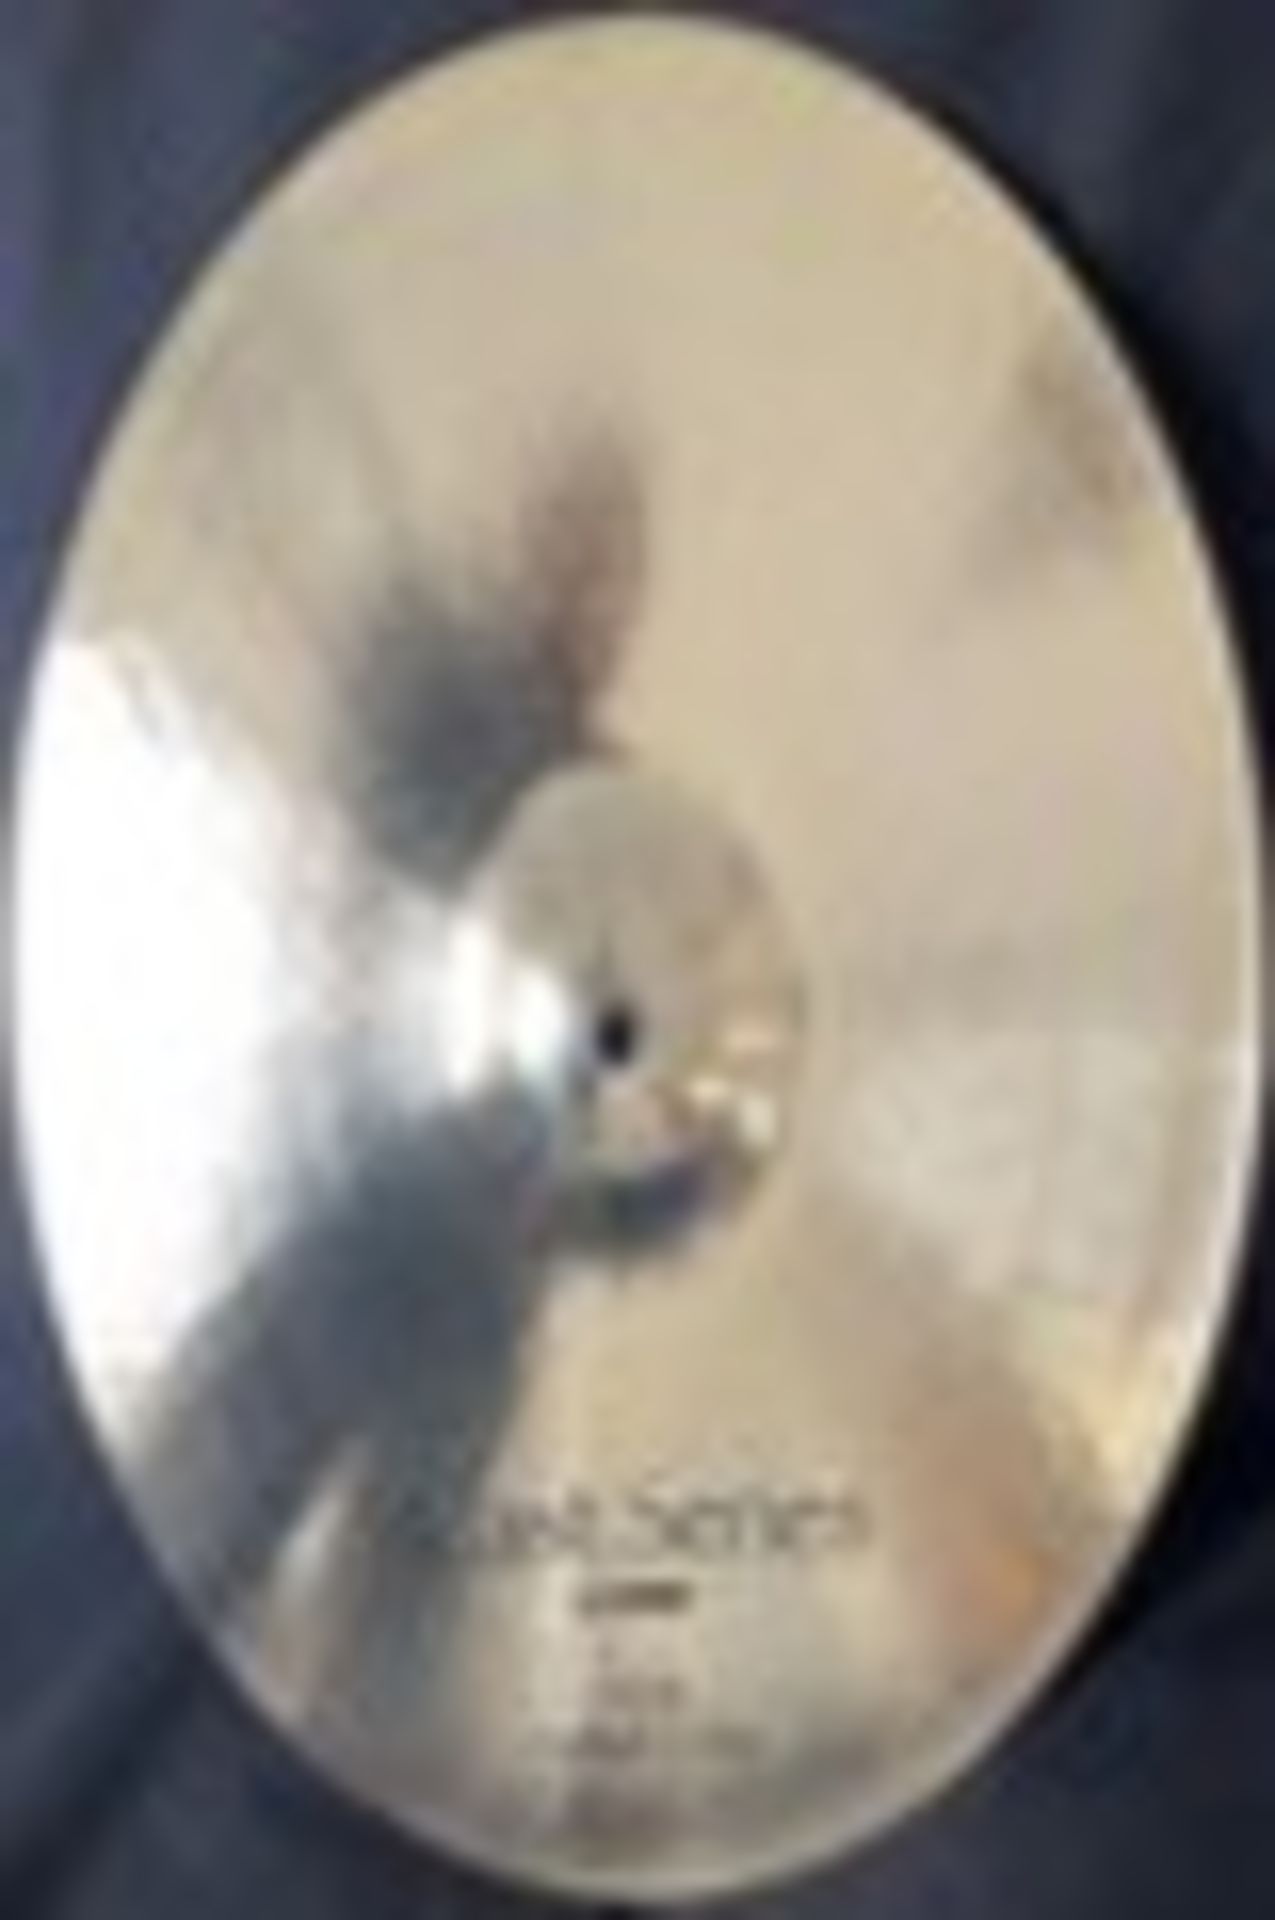 Sonor Cast Series Cymbals - great sound -16,18" crash plus 20" Ride